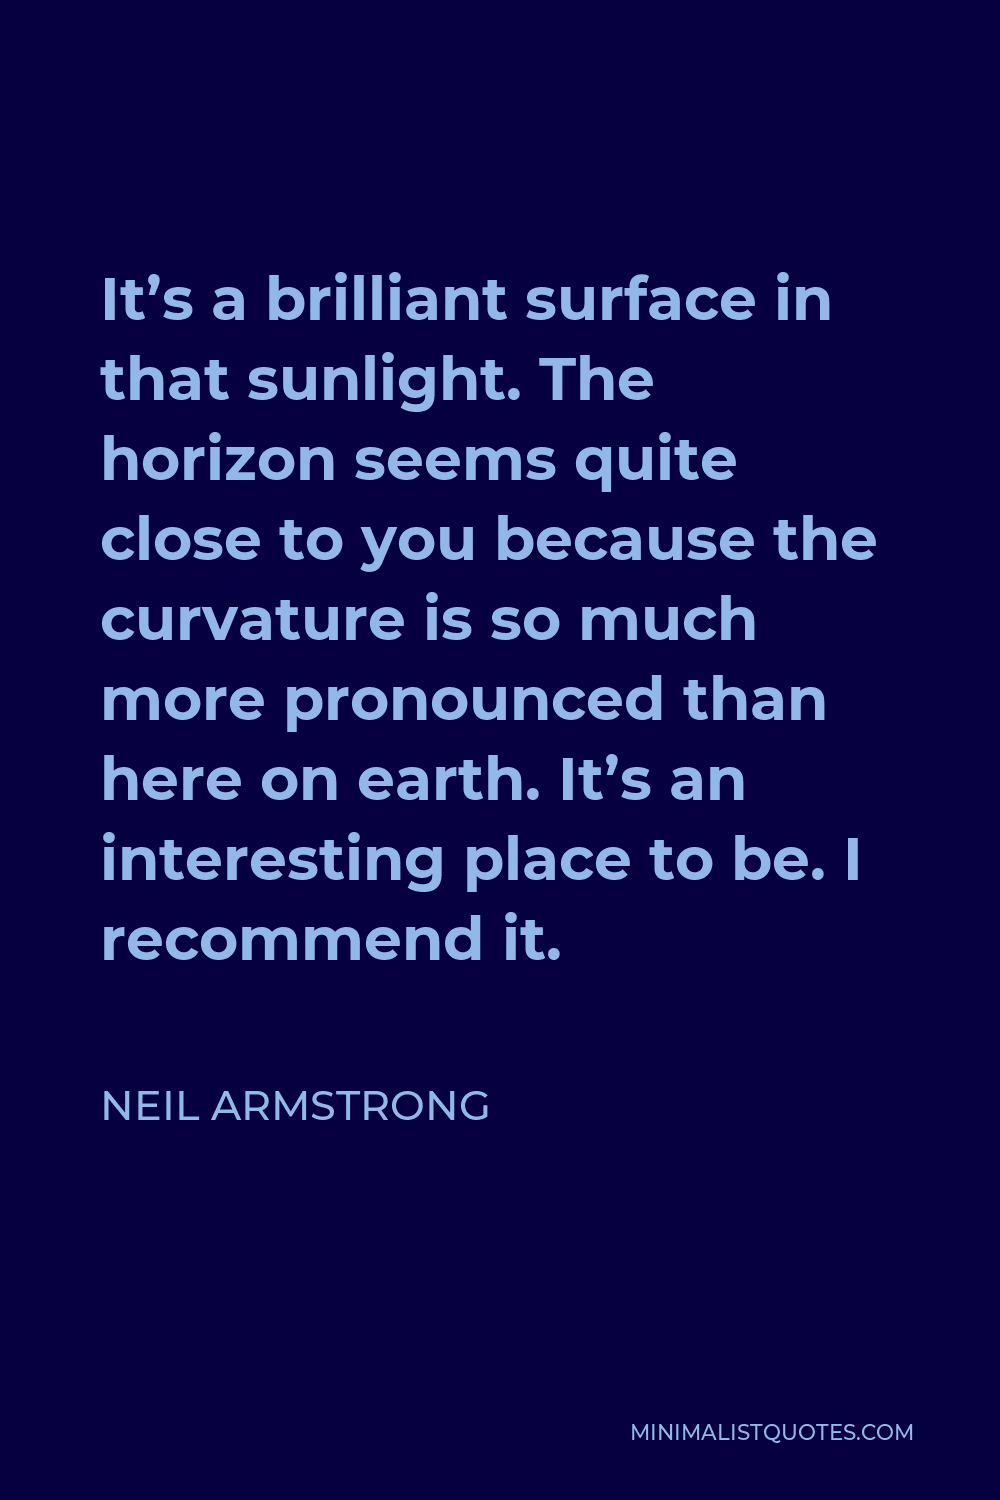 Neil Armstrong Quote - It’s a brilliant surface in that sunlight. The horizon seems quite close to you because the curvature is so much more pronounced than here on earth. It’s an interesting place to be. I recommend it.